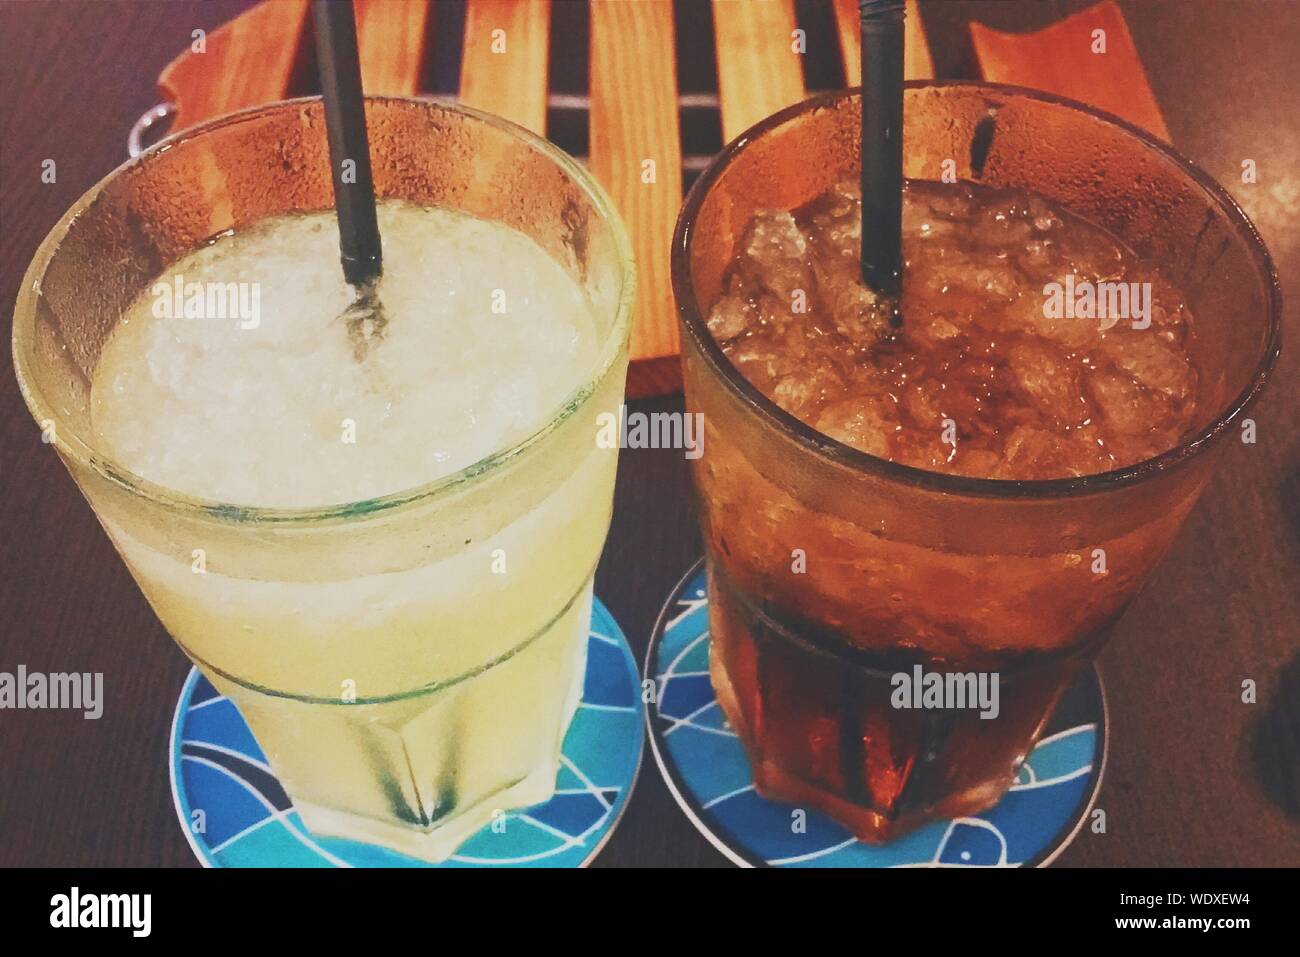 Two Alcoholic Drinks With Straw Stock Photo